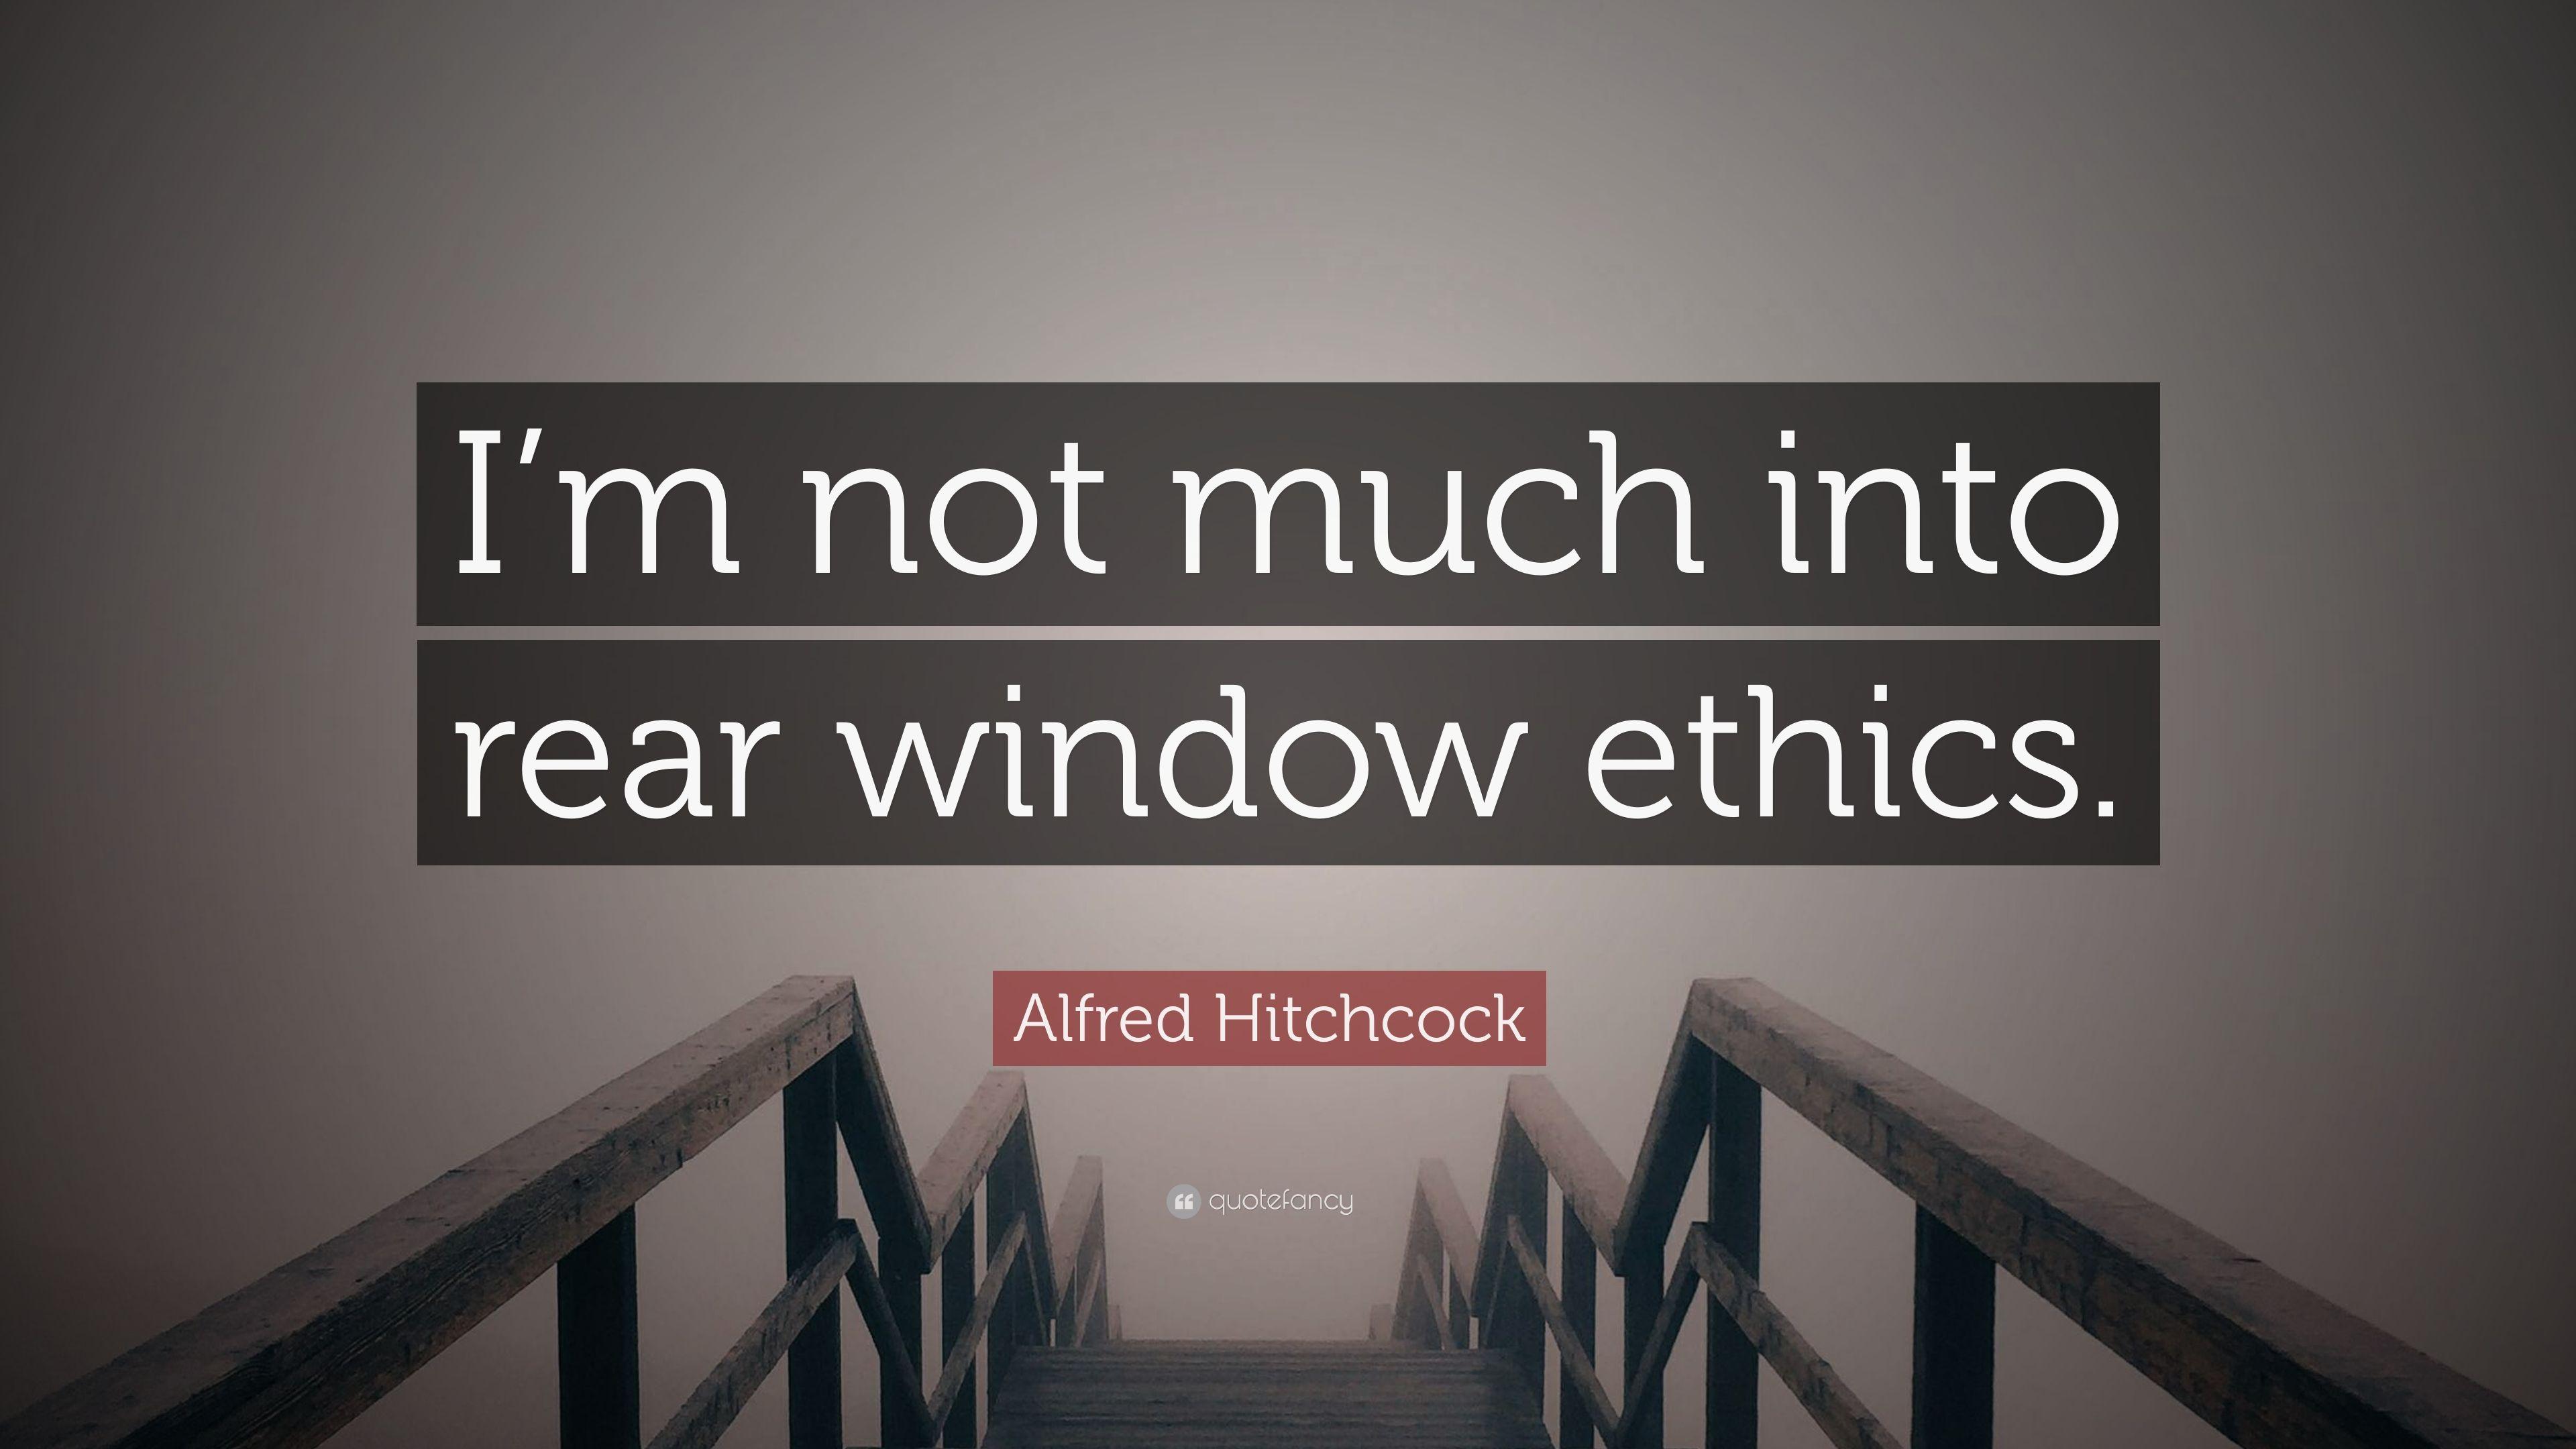 Alfred Hitchcock Quote: “I'm not much into rear window ethics.” 7